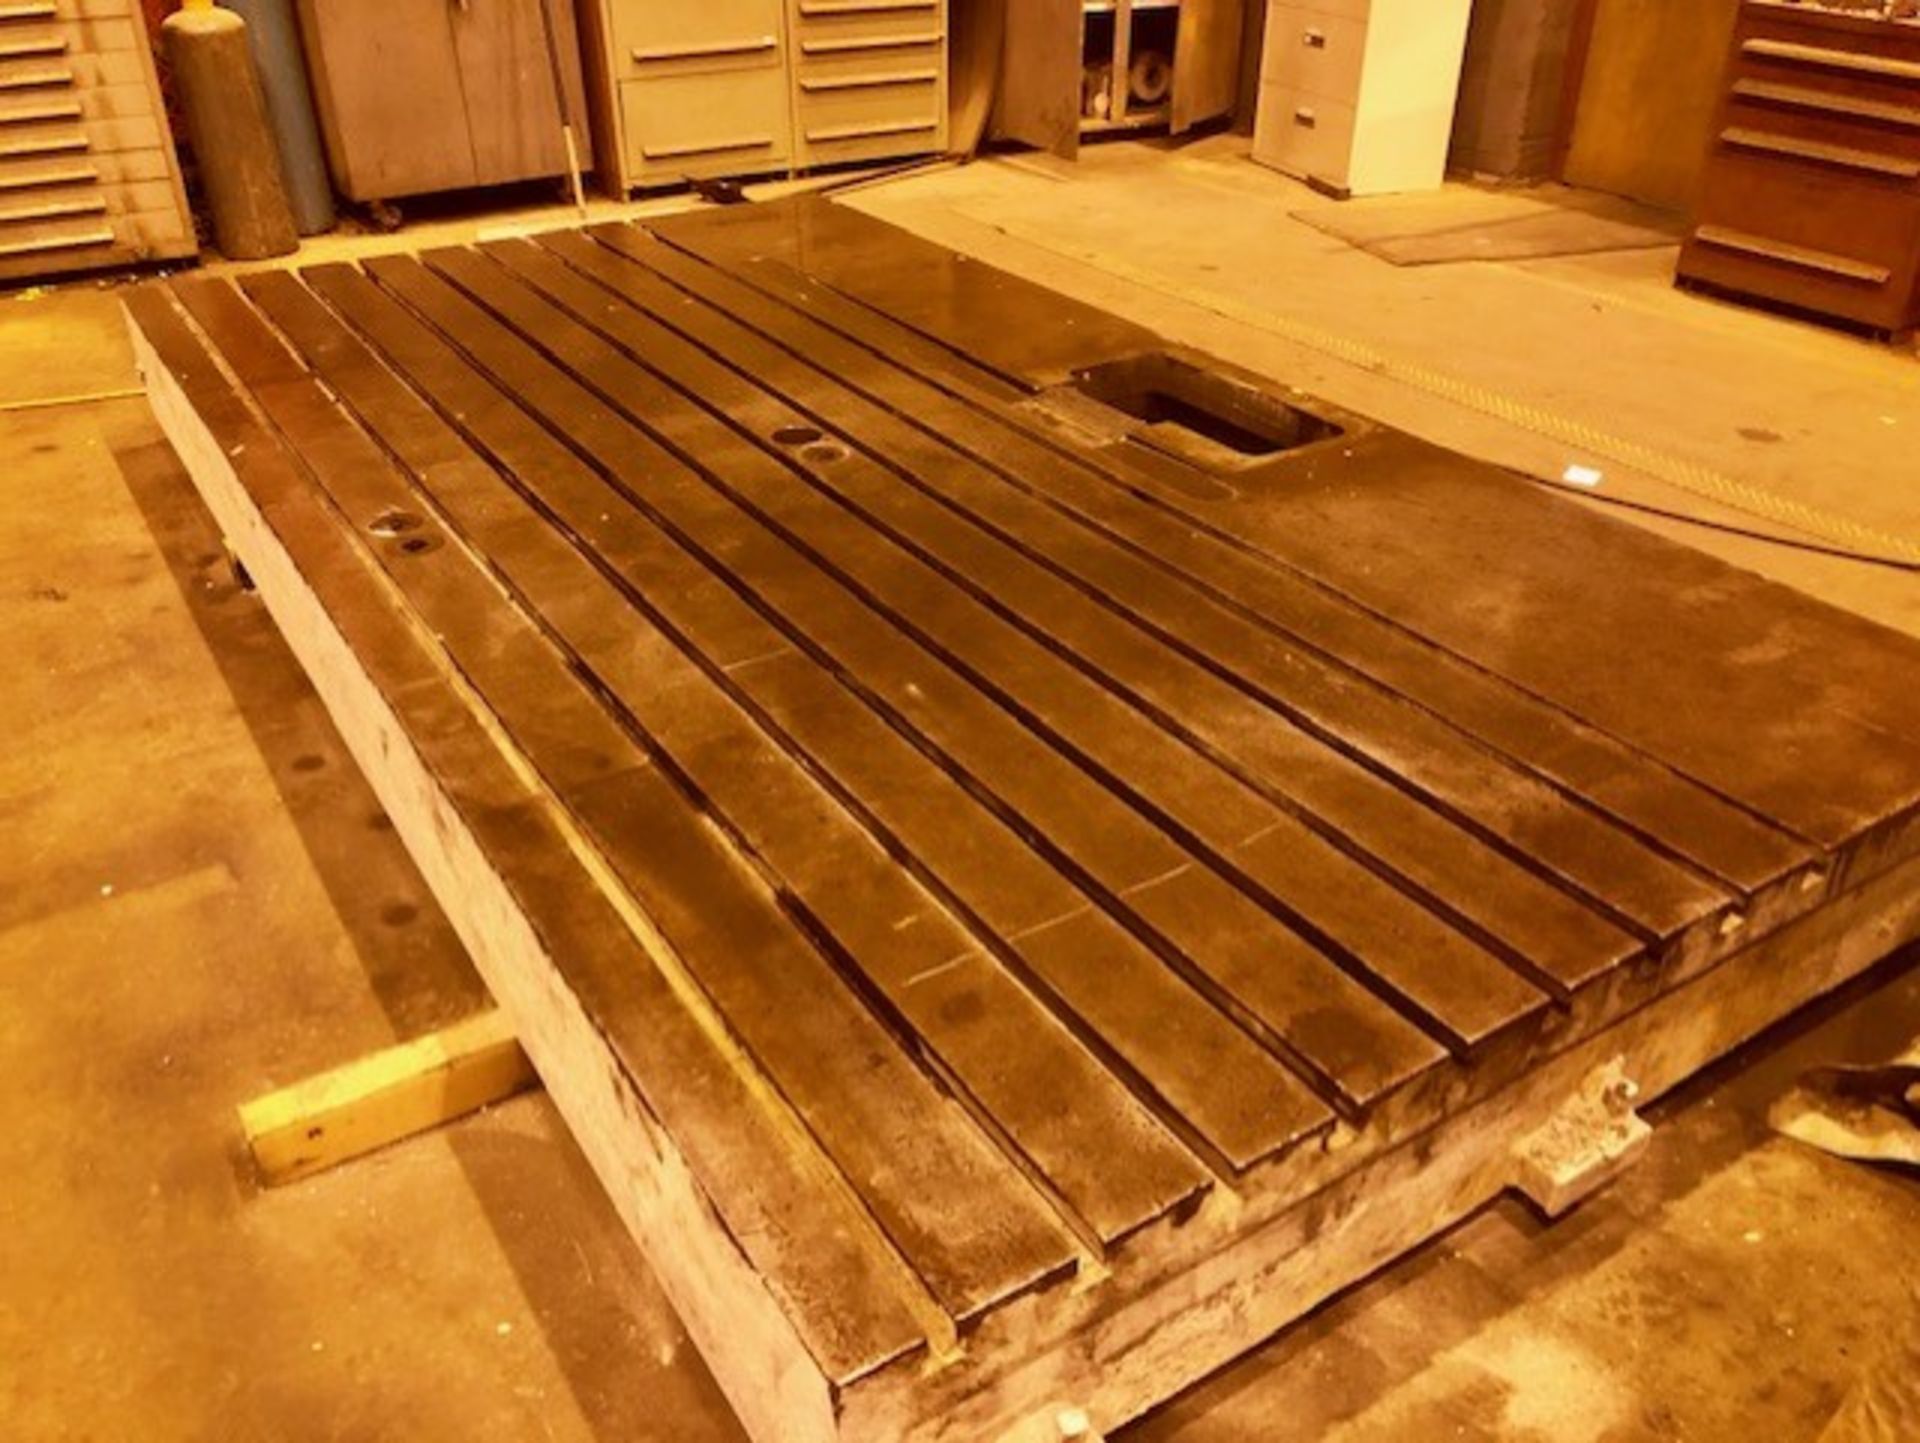 144” L x 76” W x 12” H Floor Plate - Image 4 of 4